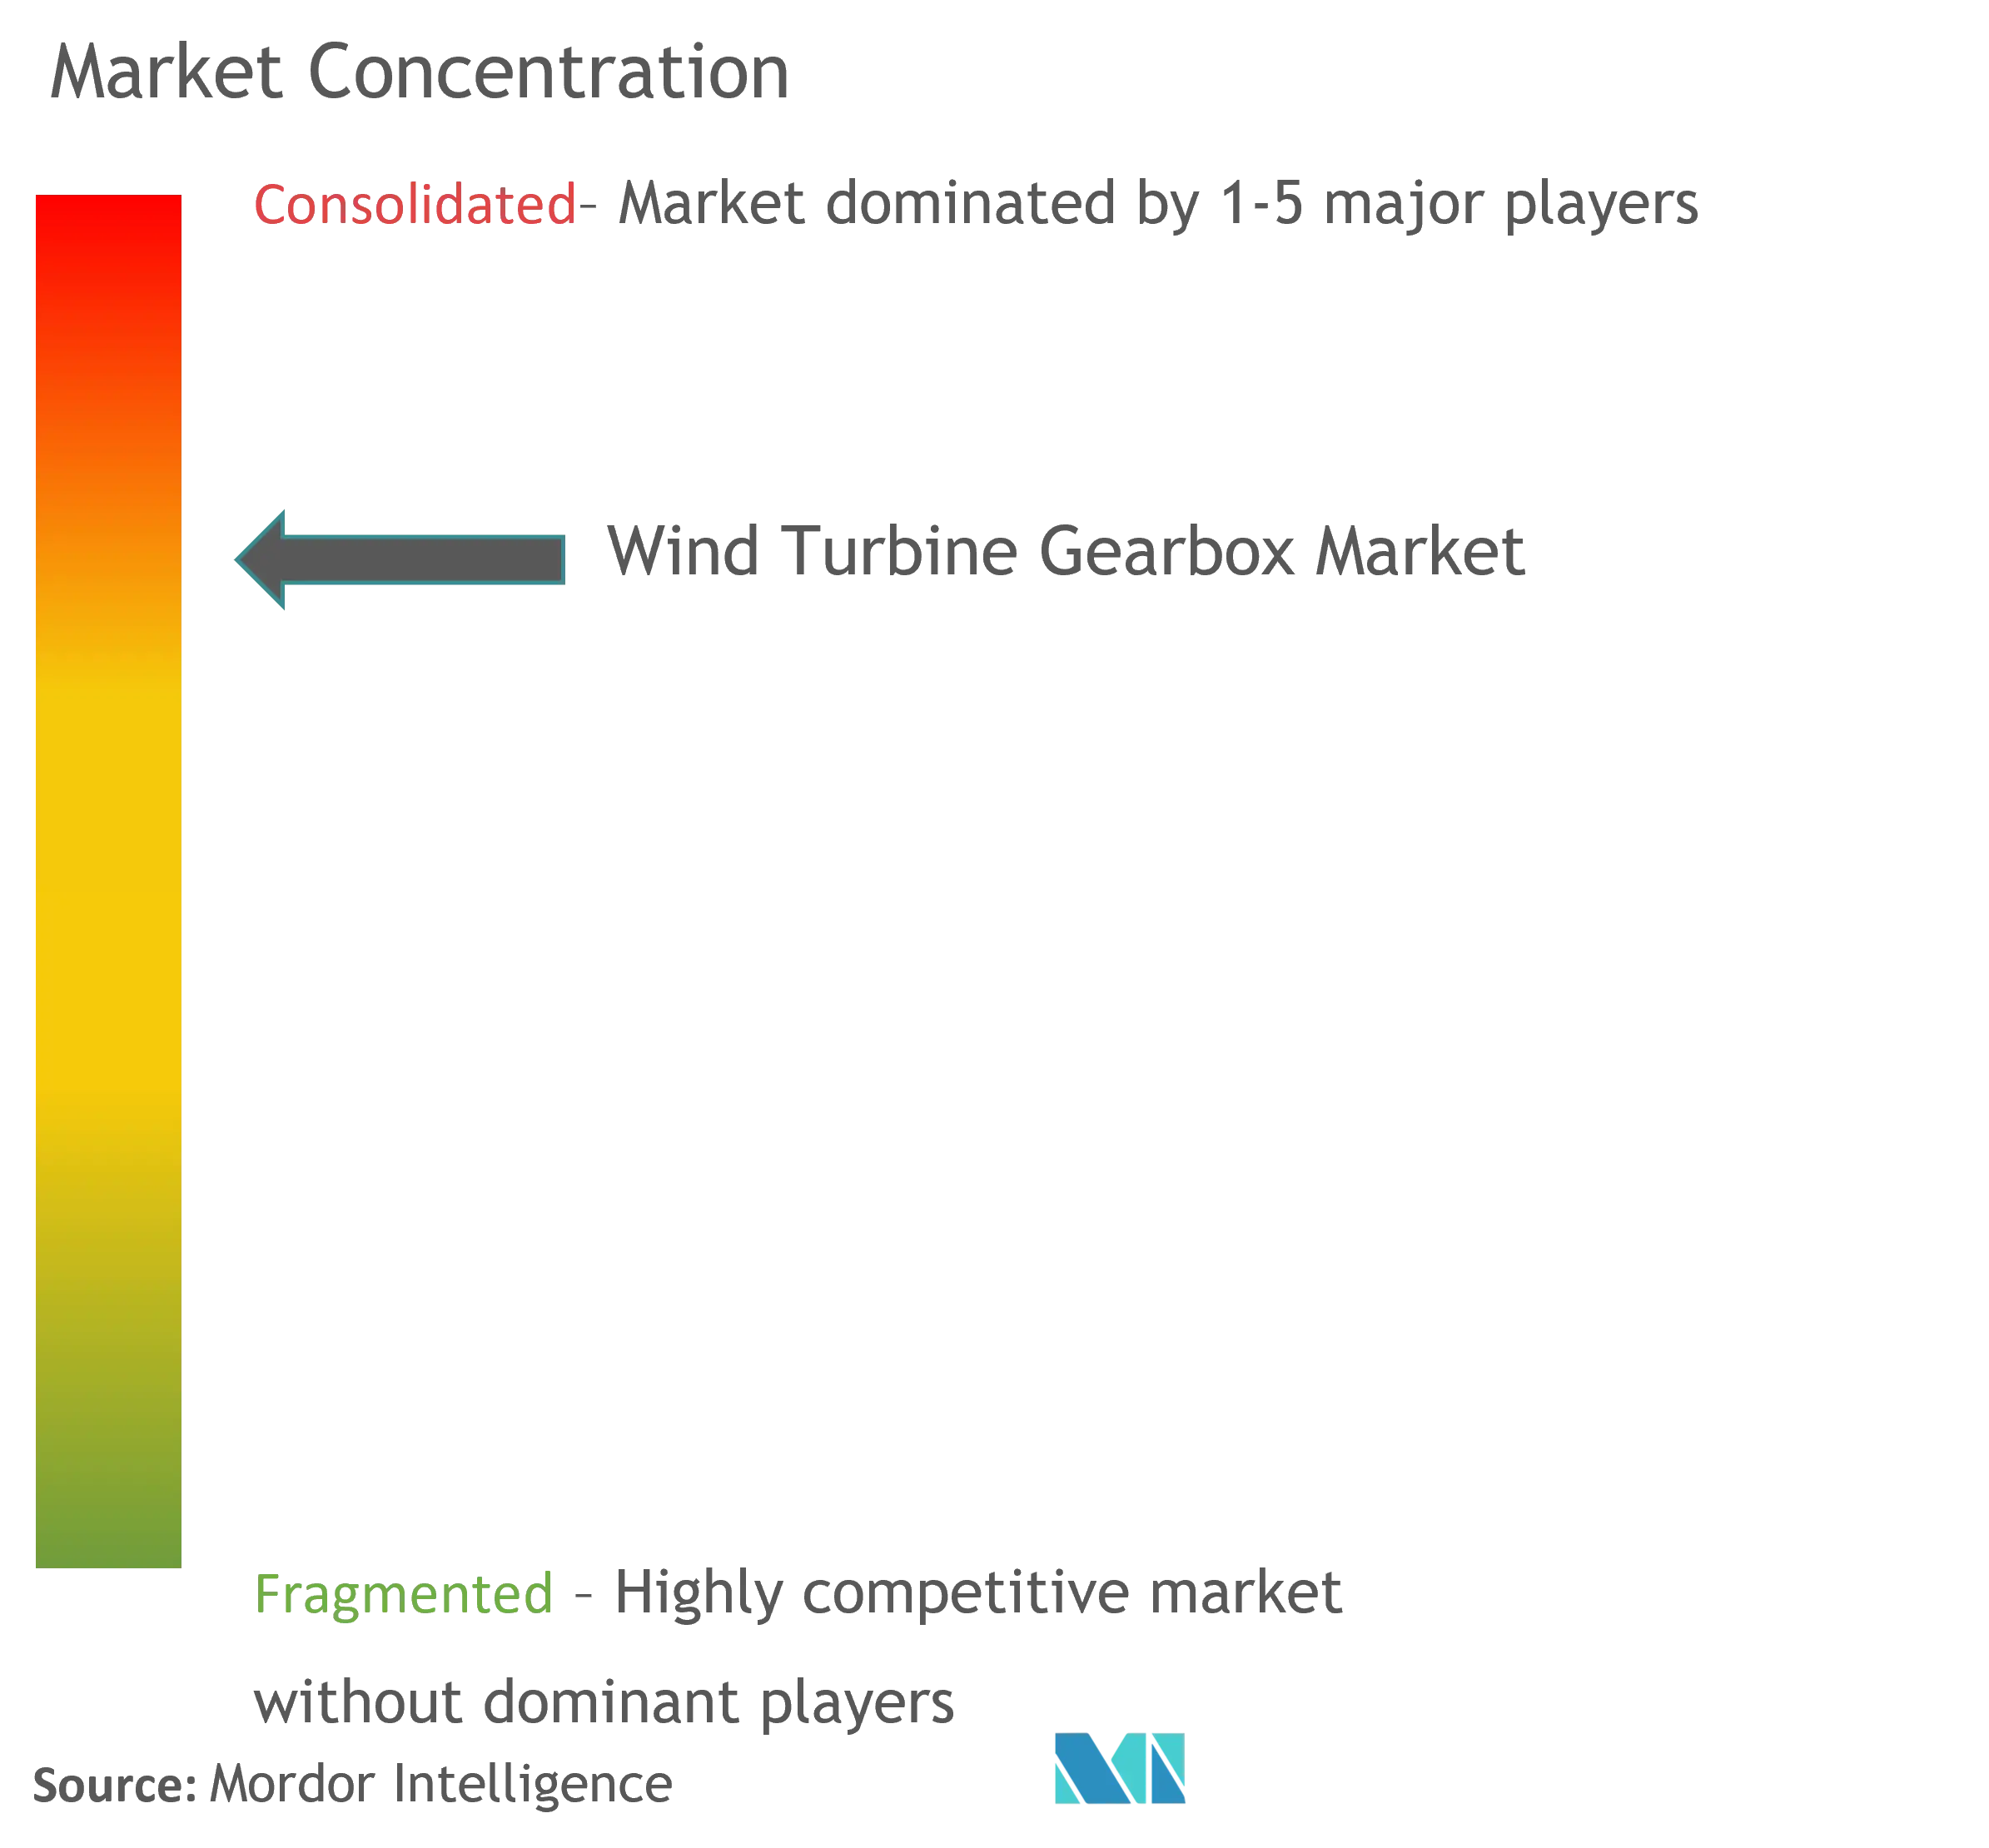 Wind Turbine Gearbox Market Concentration